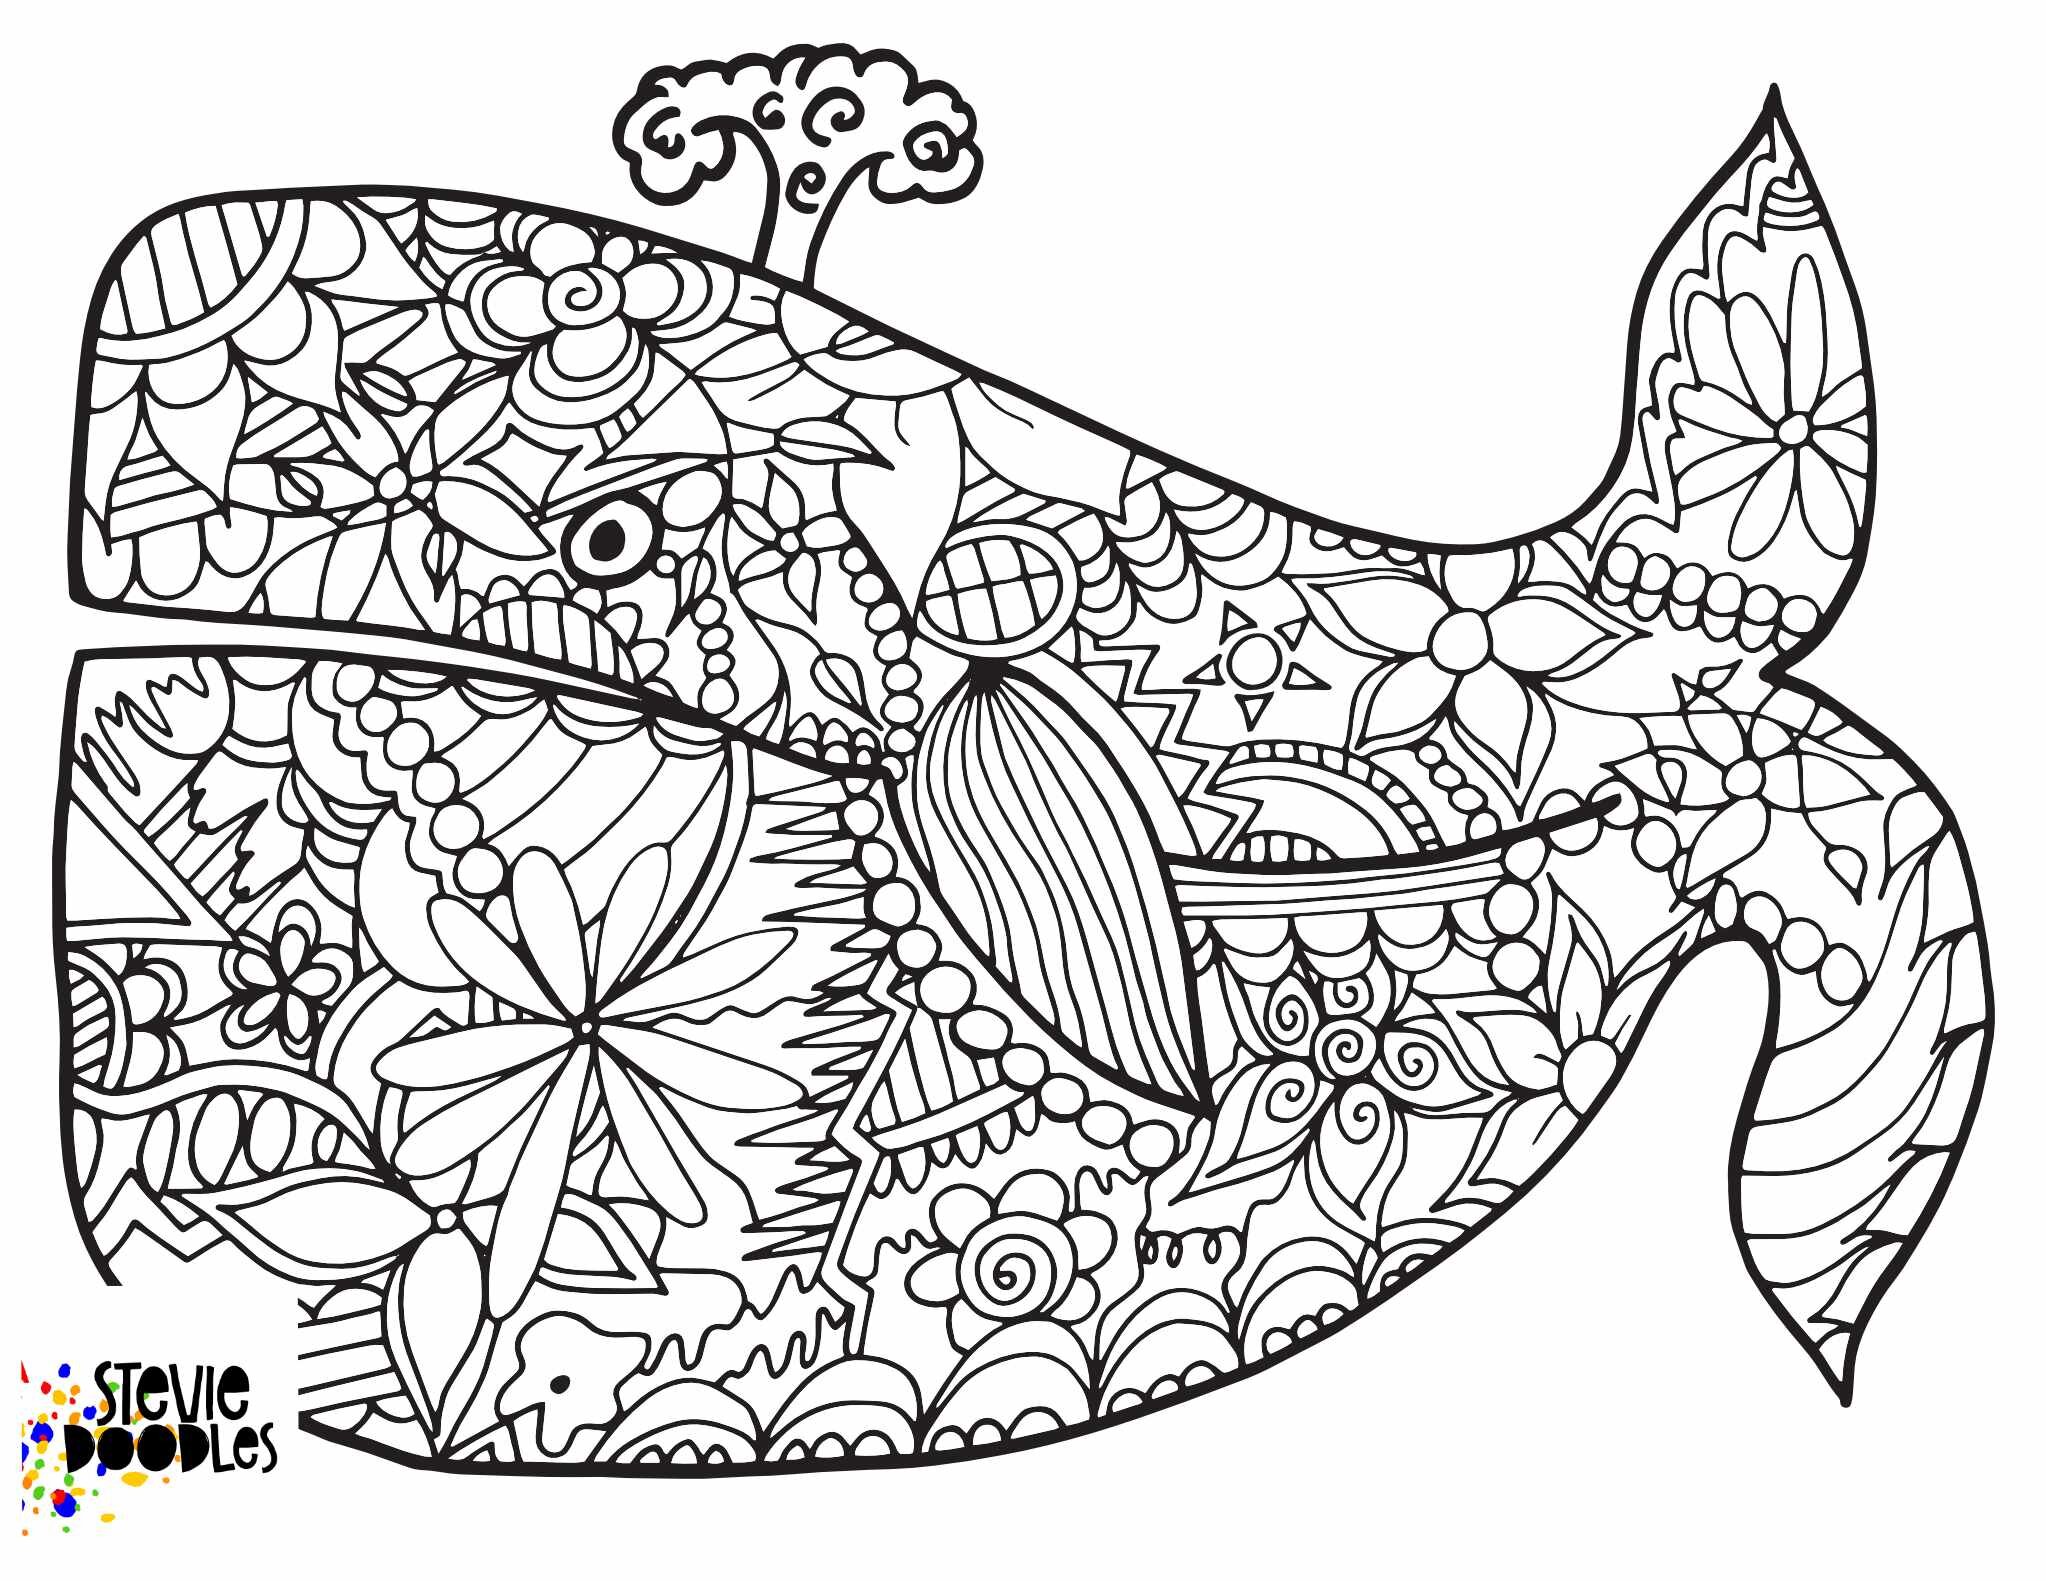 Free WHALE Coloring Page CLICK HERE TO DOWNLOAD THE PAGE ABOVE!